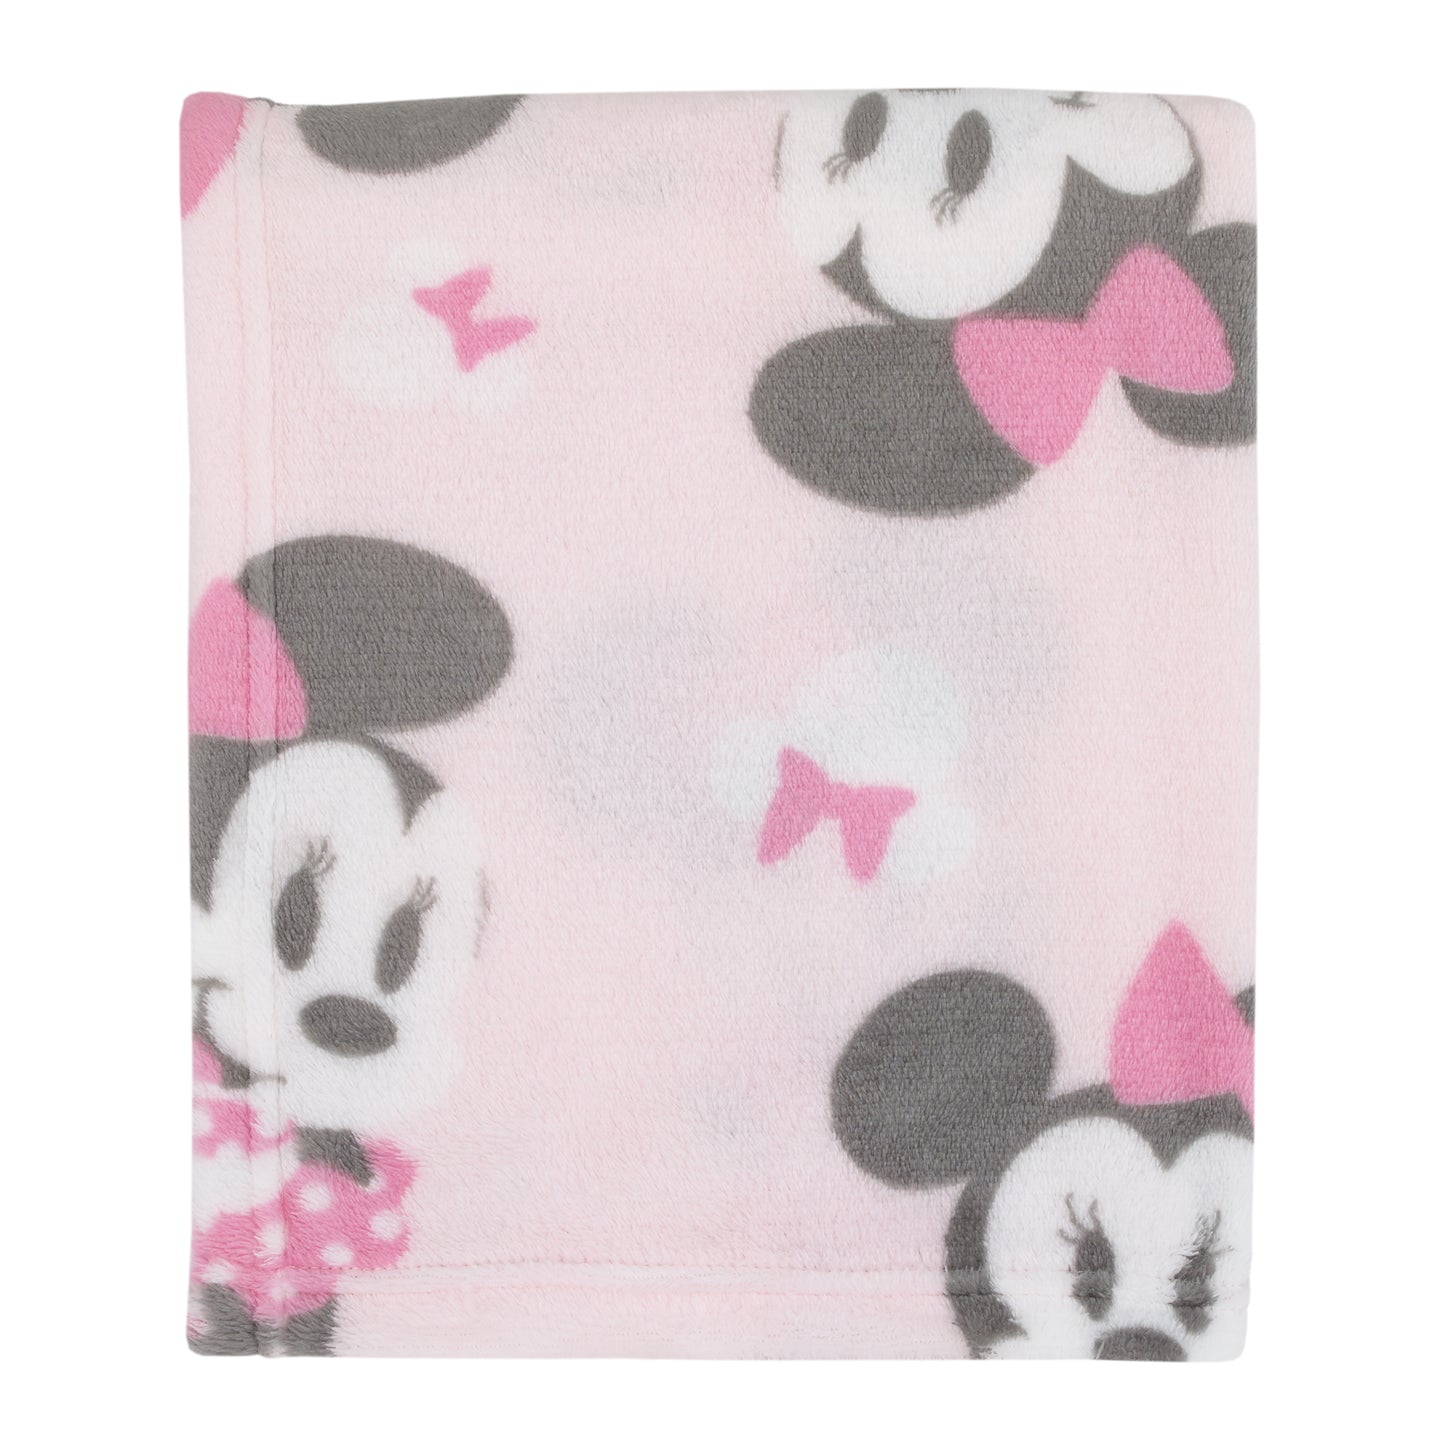 Disney Minnie Mouse Pastel Pink, White and Black Bows and Icons Super Soft Baby Blanket